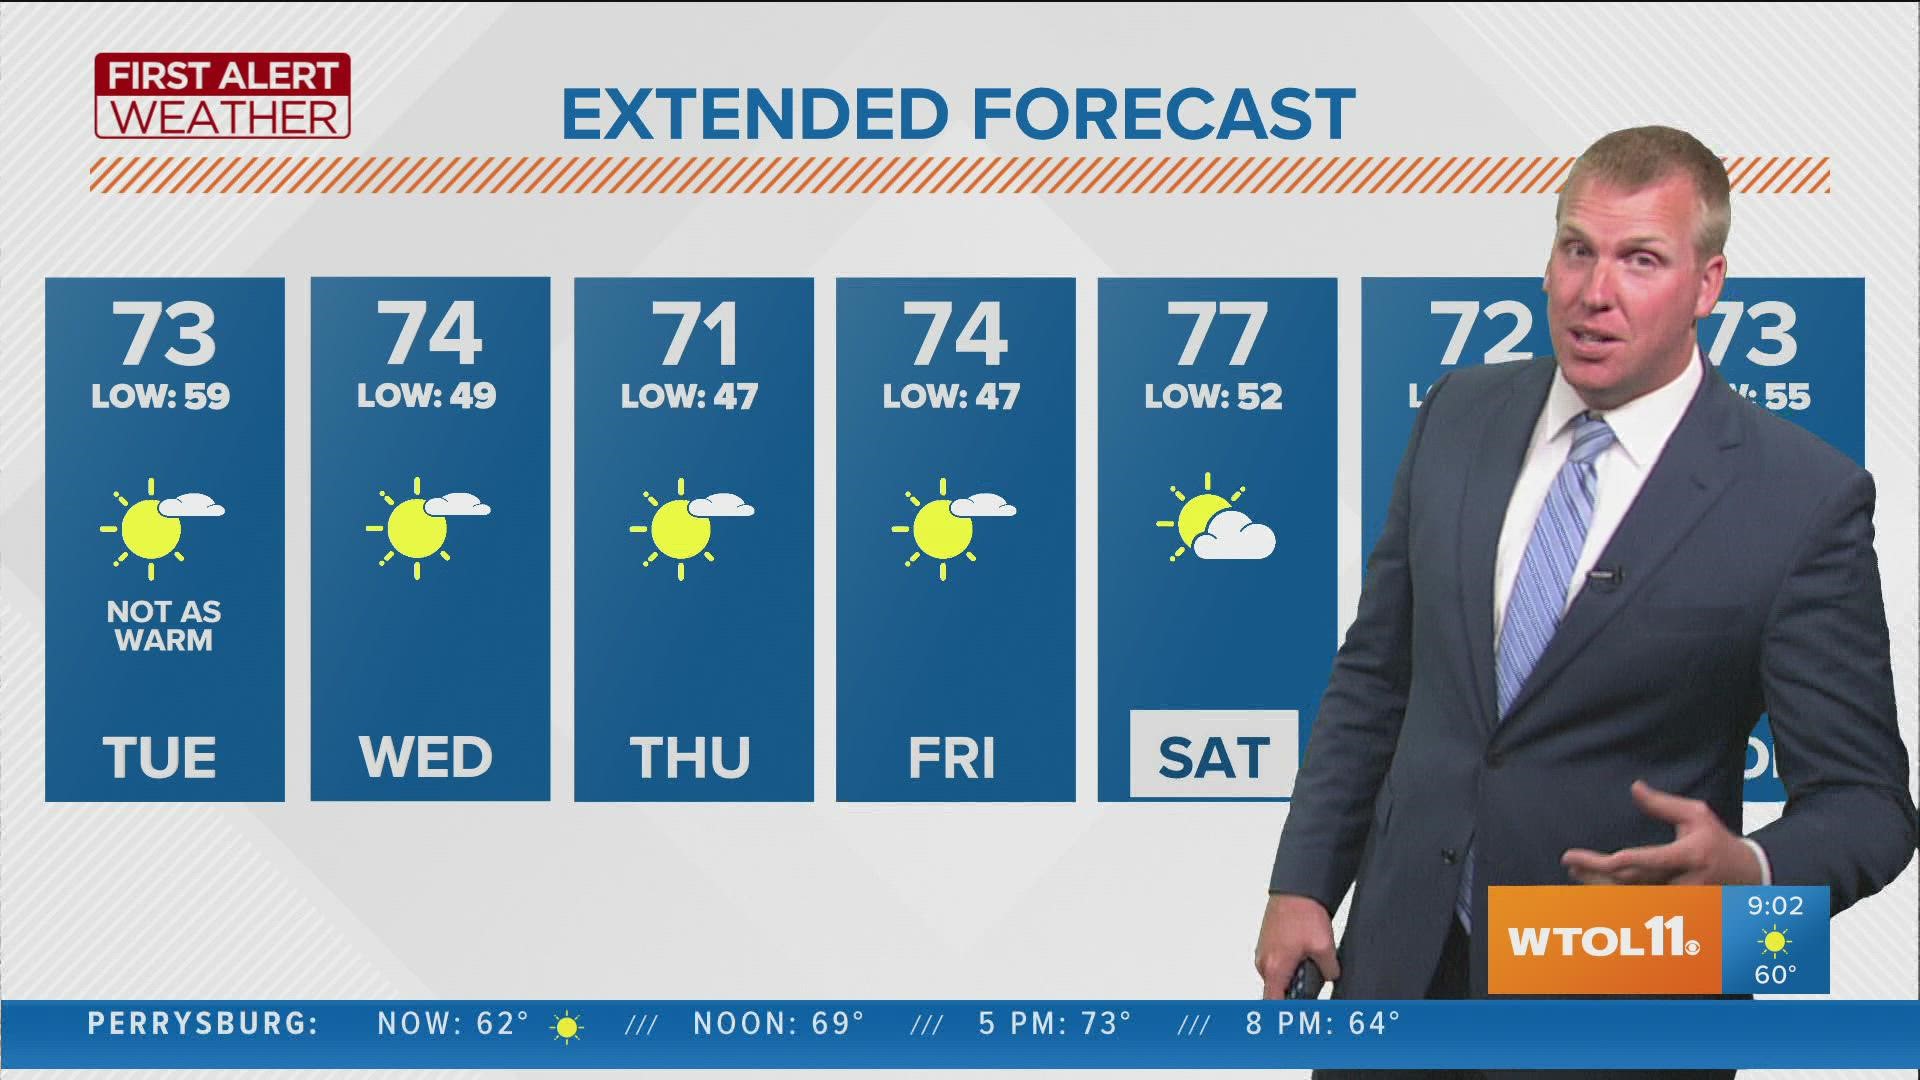 Expect highs in the 70s through the weekend!